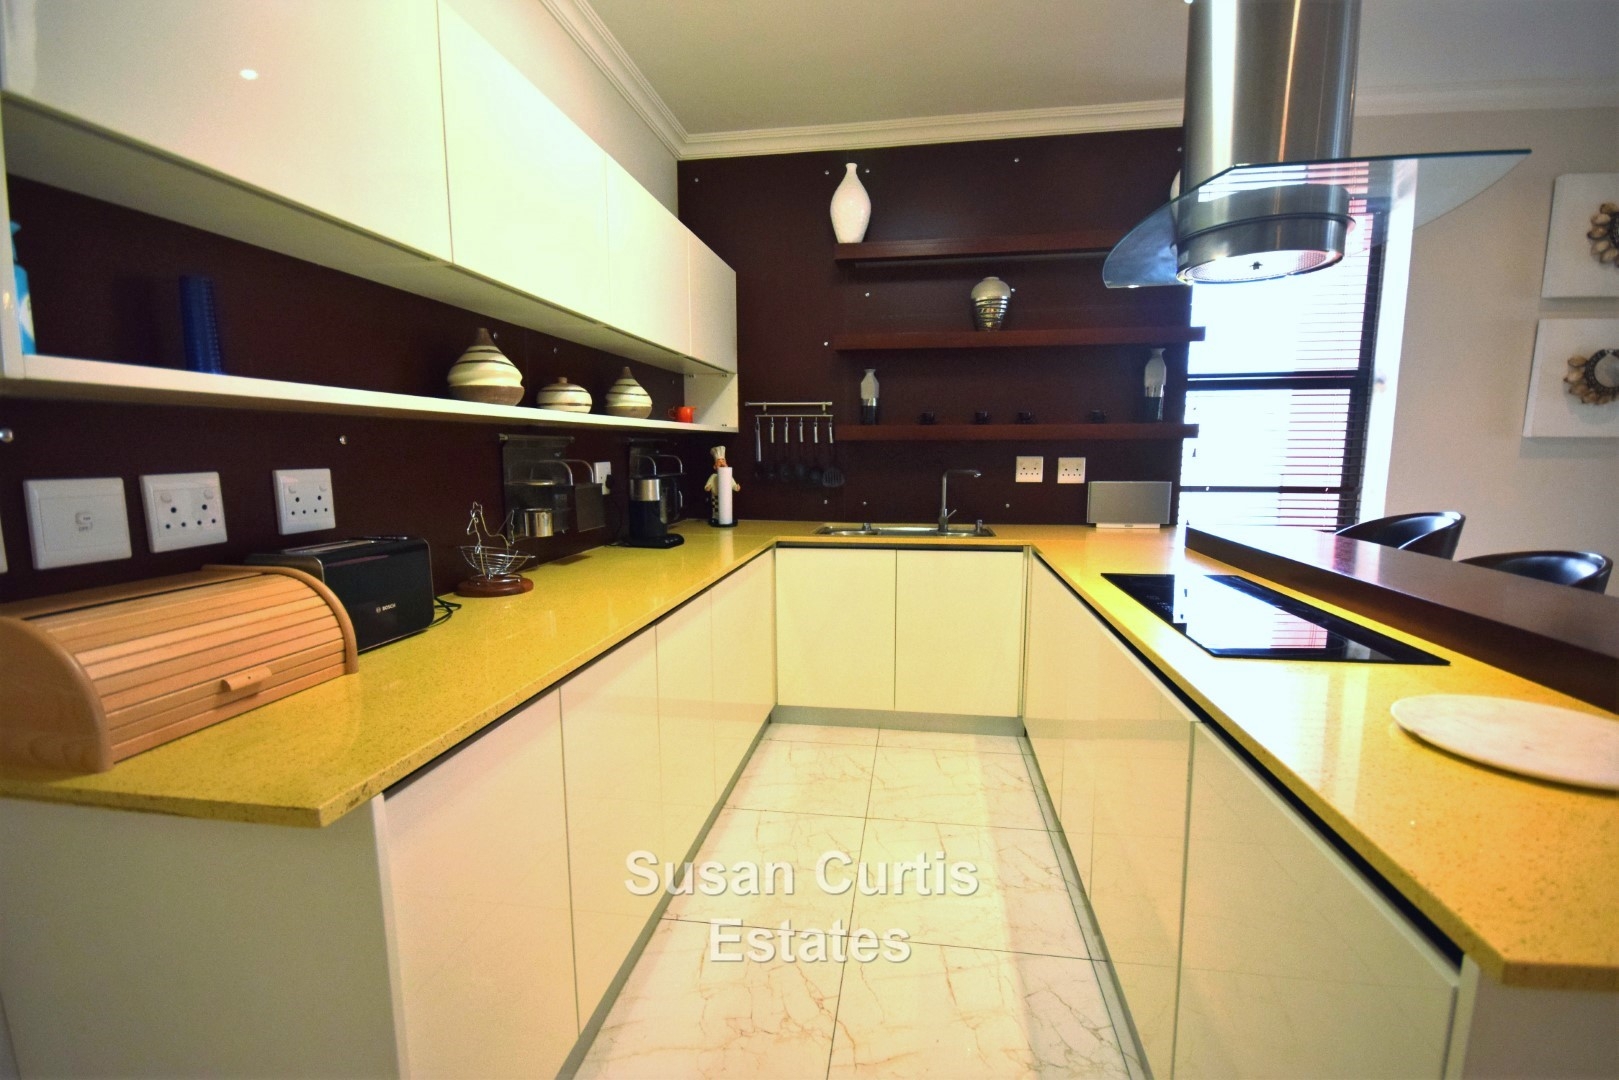 Well planned kitchen with quality finishes